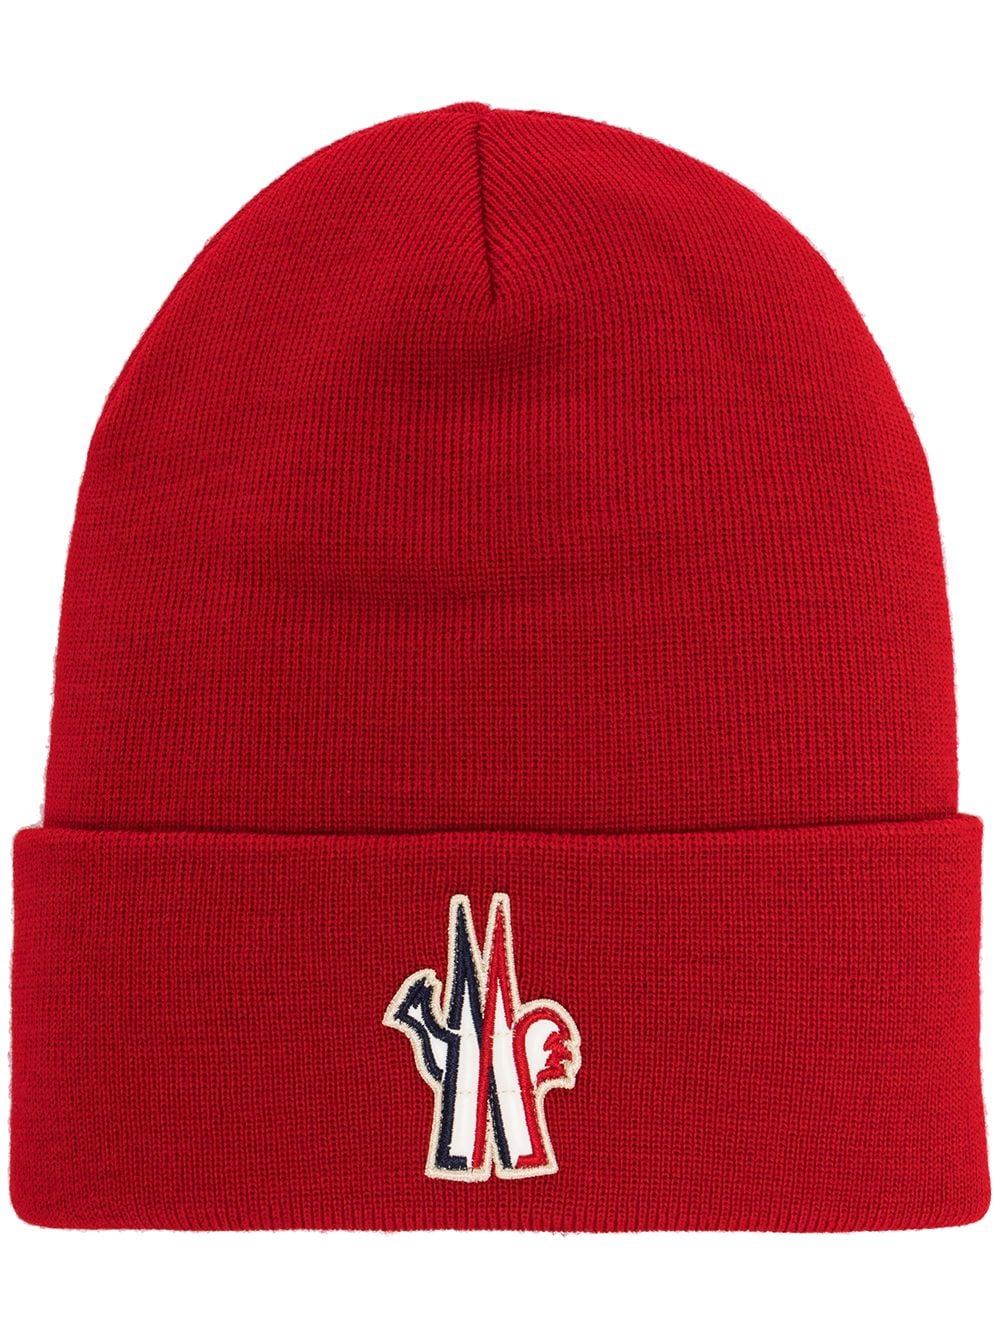 Moncler Grenoble Logo Patch Beanie in Red